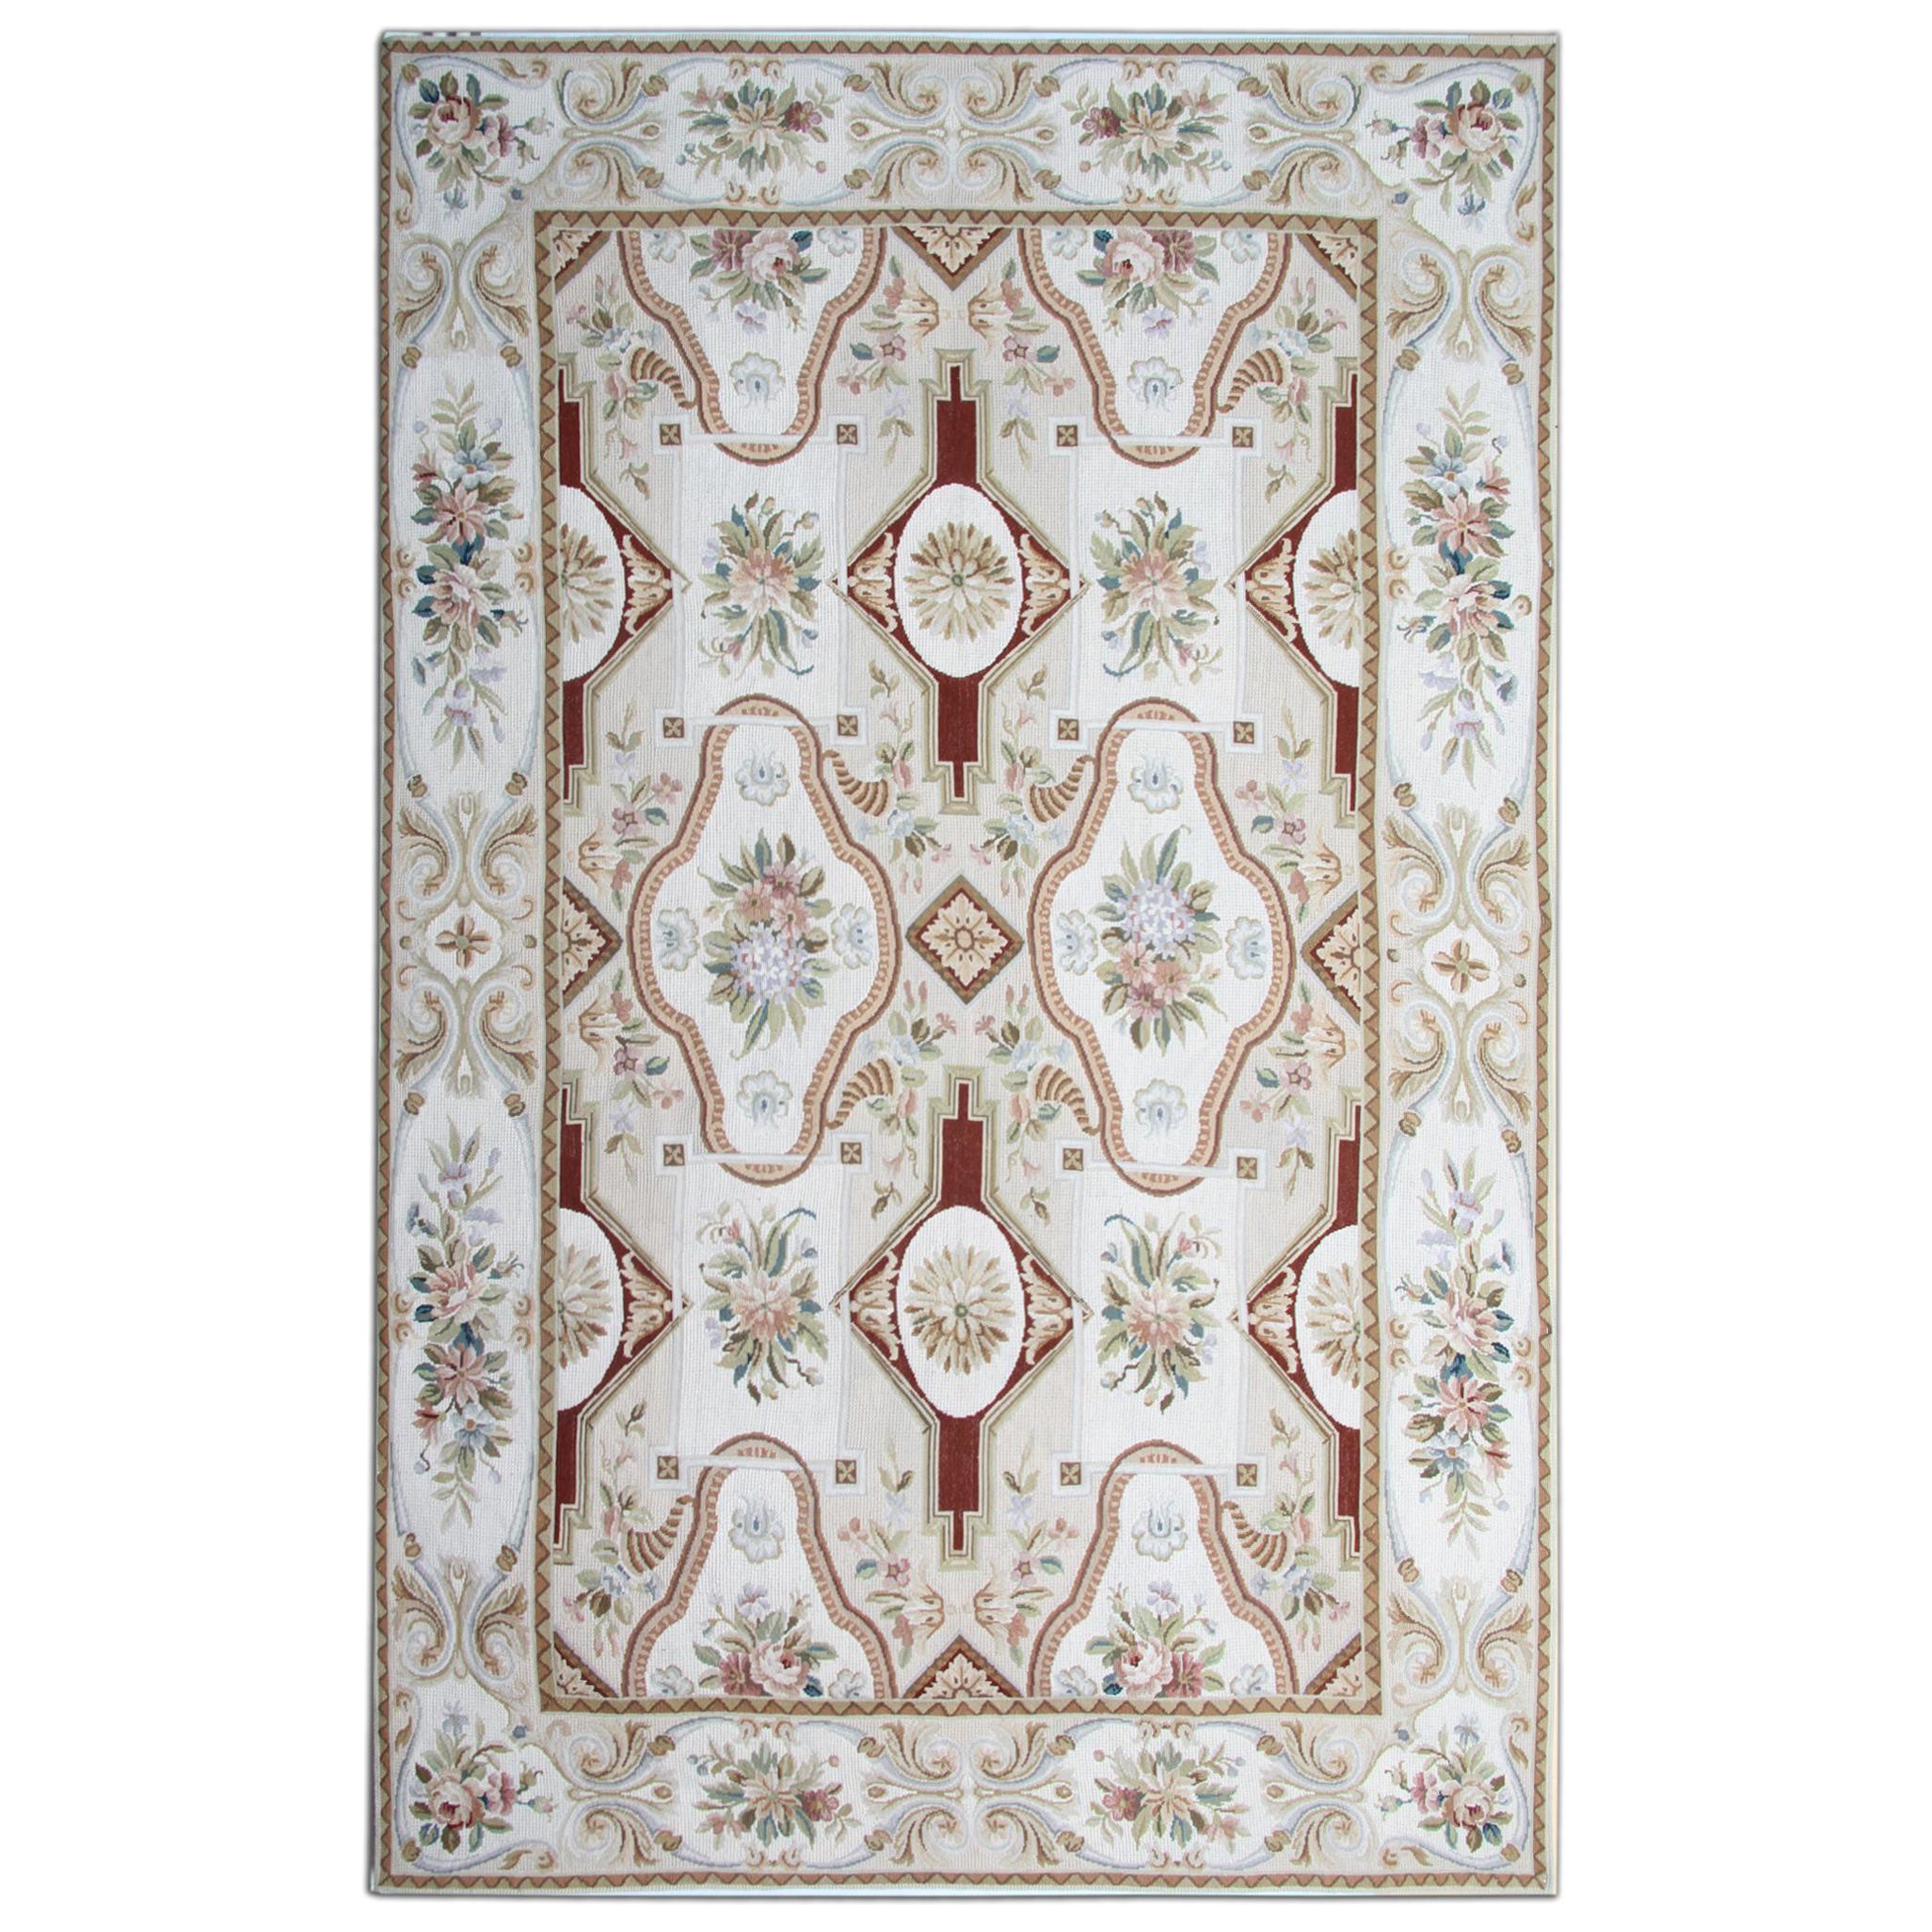 Aubusson Style Area Rug Traditional Carpet Handwoven Wool Needlepoint